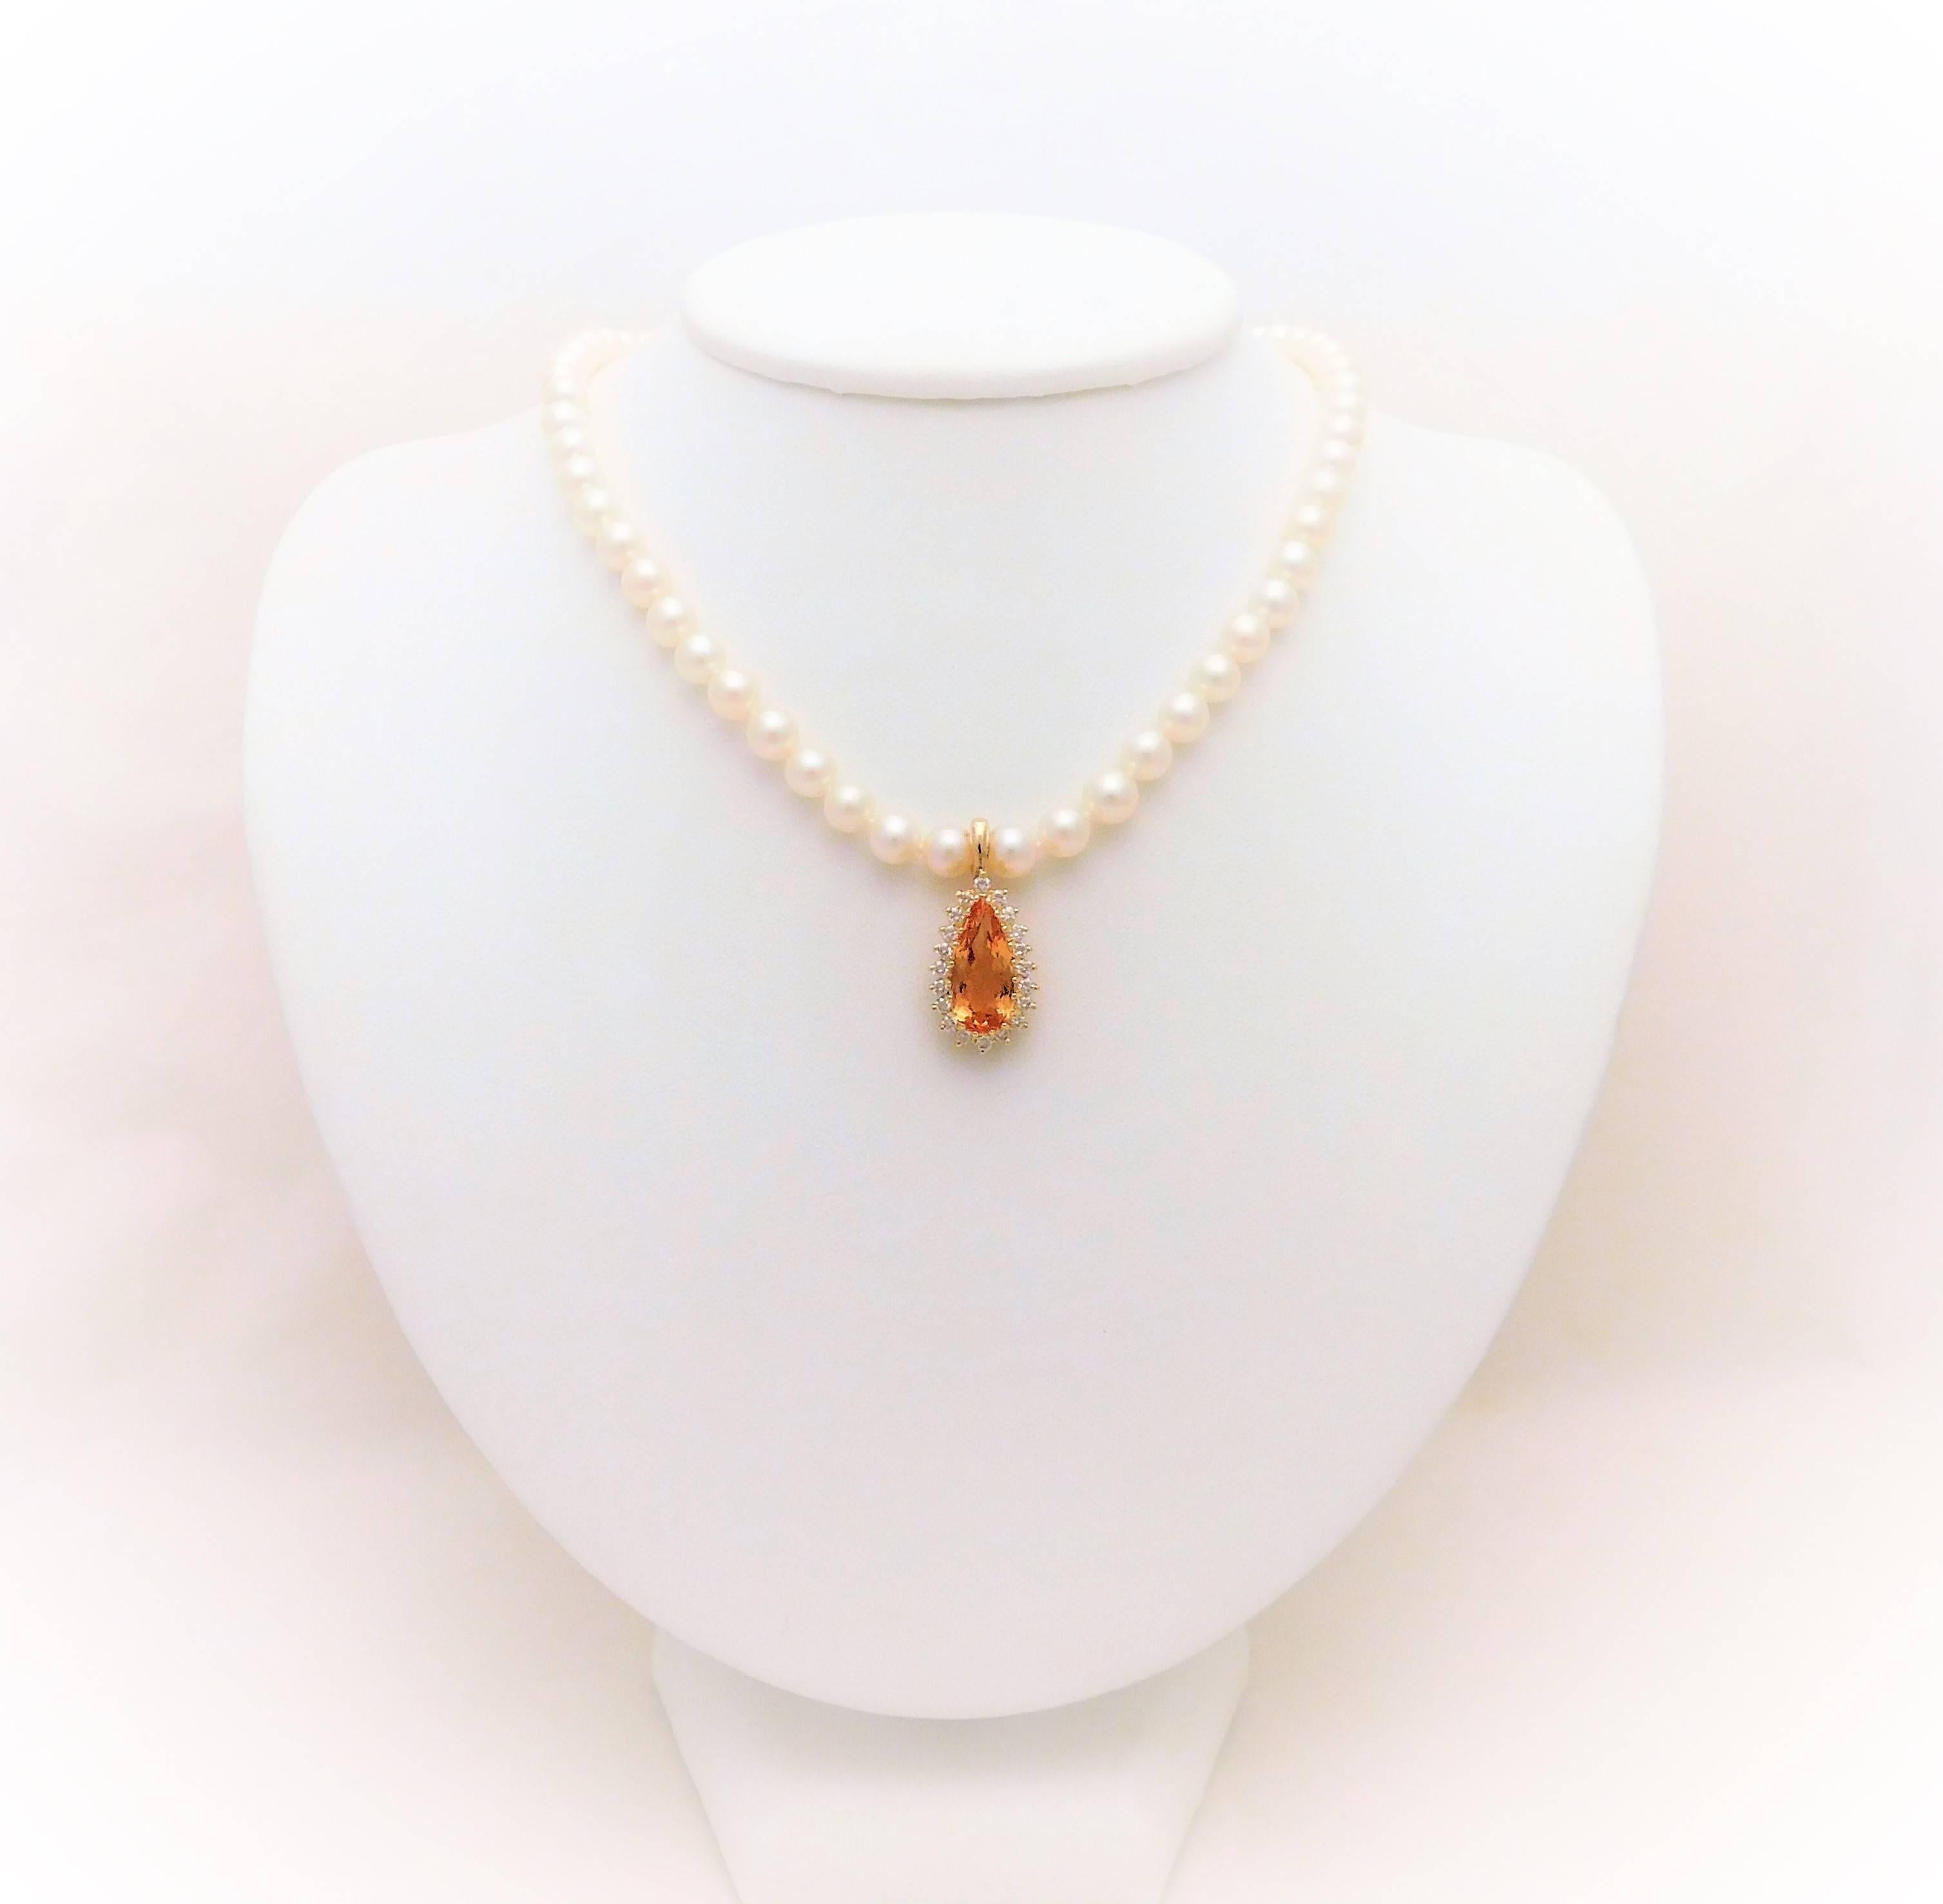 From a Southern aristocratic estate.  Circa 1970.  This gorgeous pendant is made of solid 14k yellow gold. It has been masterfully jeweled with an exquisite 7 ct pear brilliant-cut honey Topaz. Surrounding this fine gemstone are 20 immaculate G